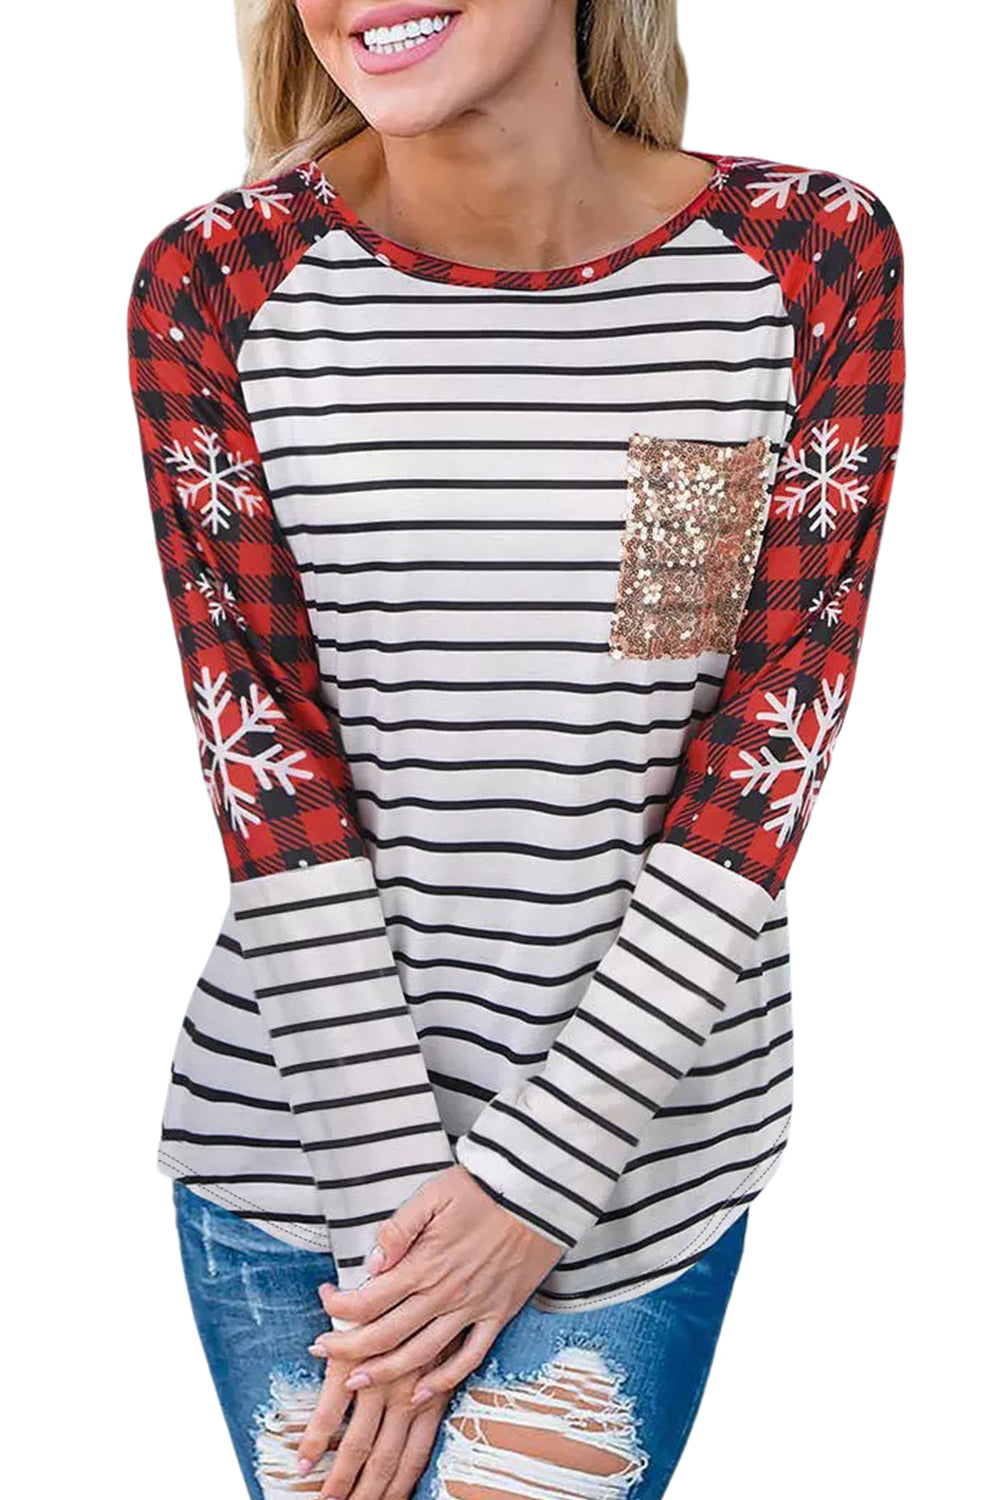 Stripe Christmas Plaid Striped Patchwork Long Sleeve Top